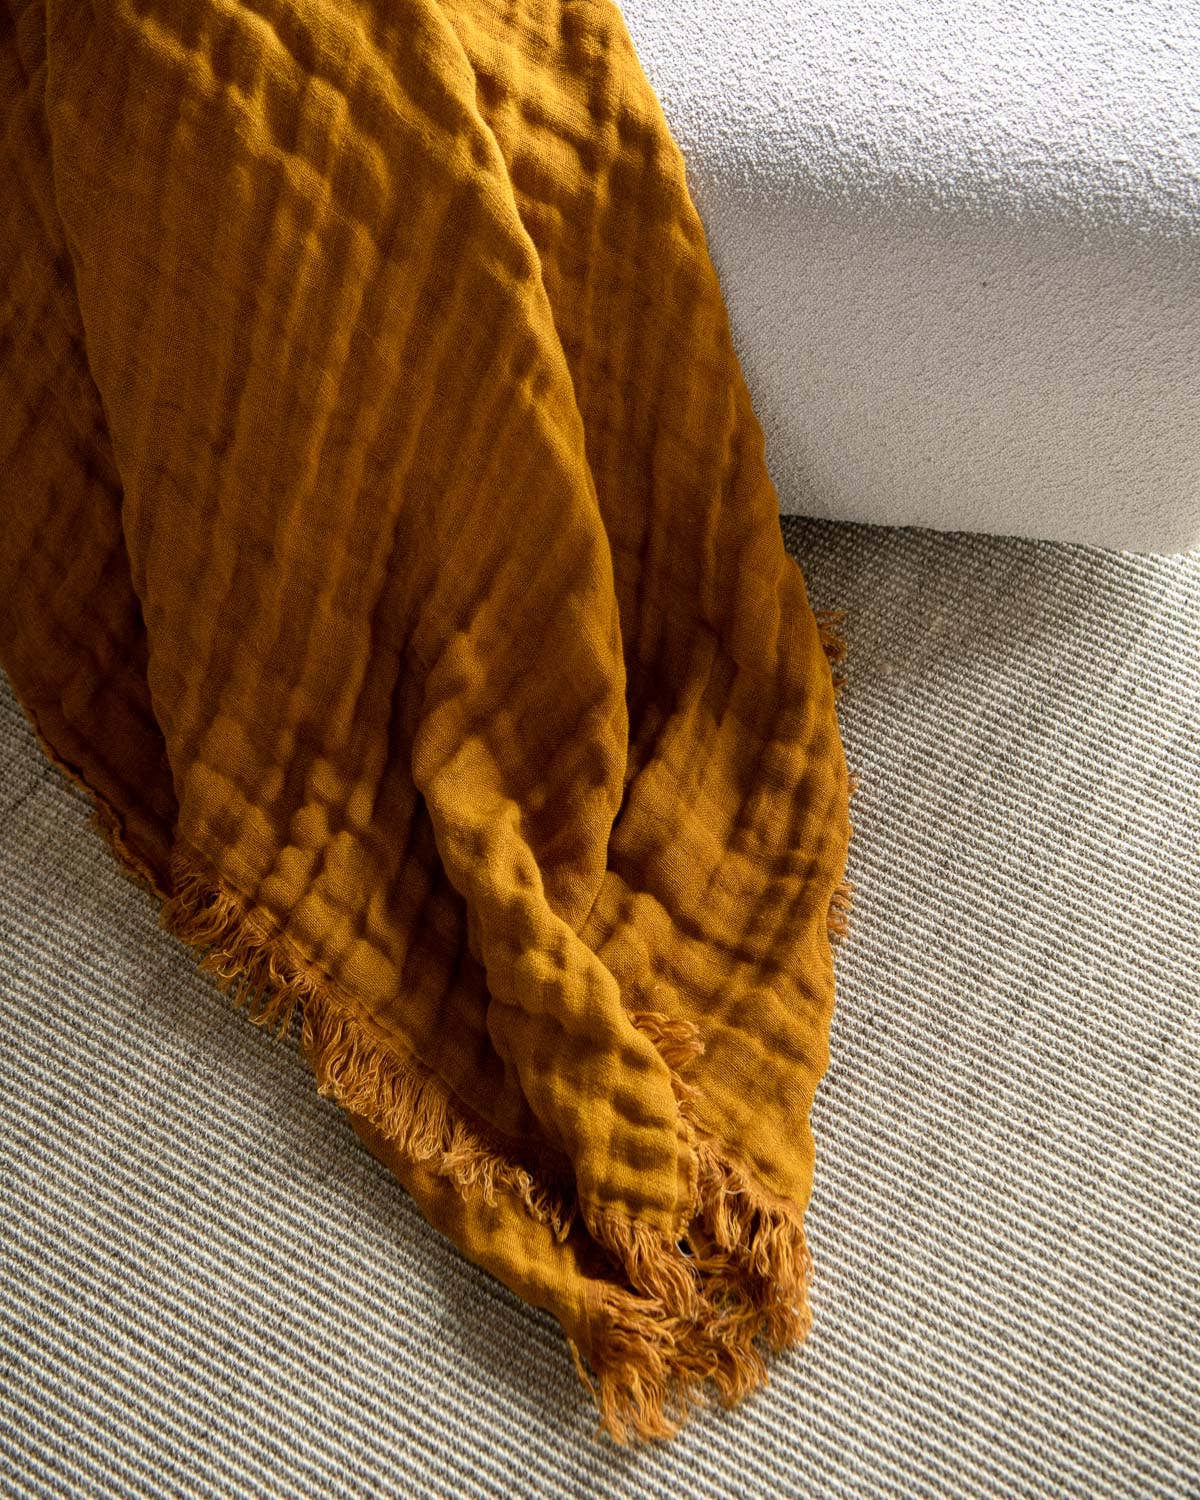 Double Sided Linen Throw